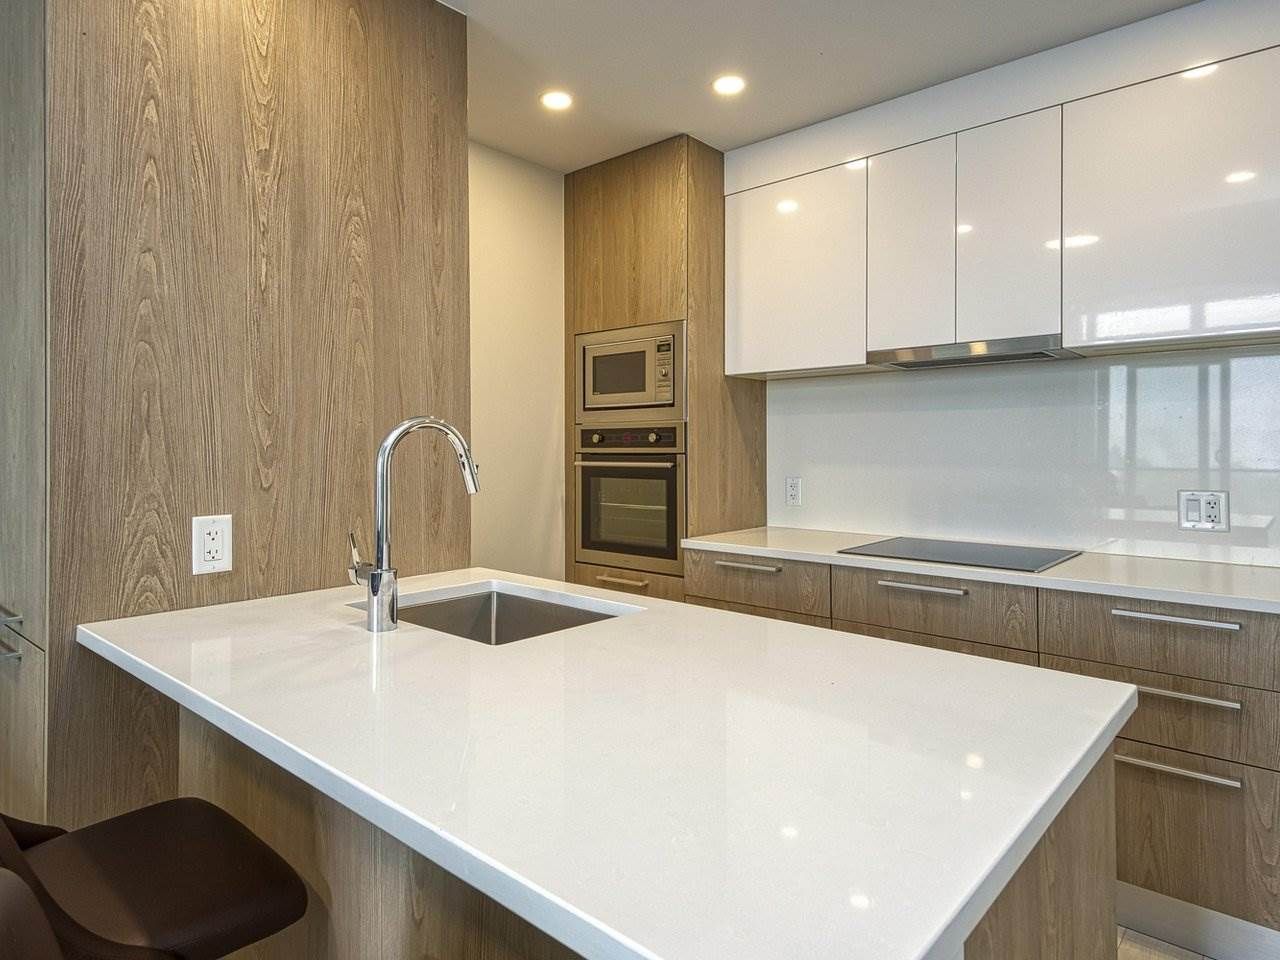 Main Photo: 507 2508 Watson Street in Vancouver: Mount Pleasant VE Condo for sale (Vancouver East)  : MLS®# R2498711